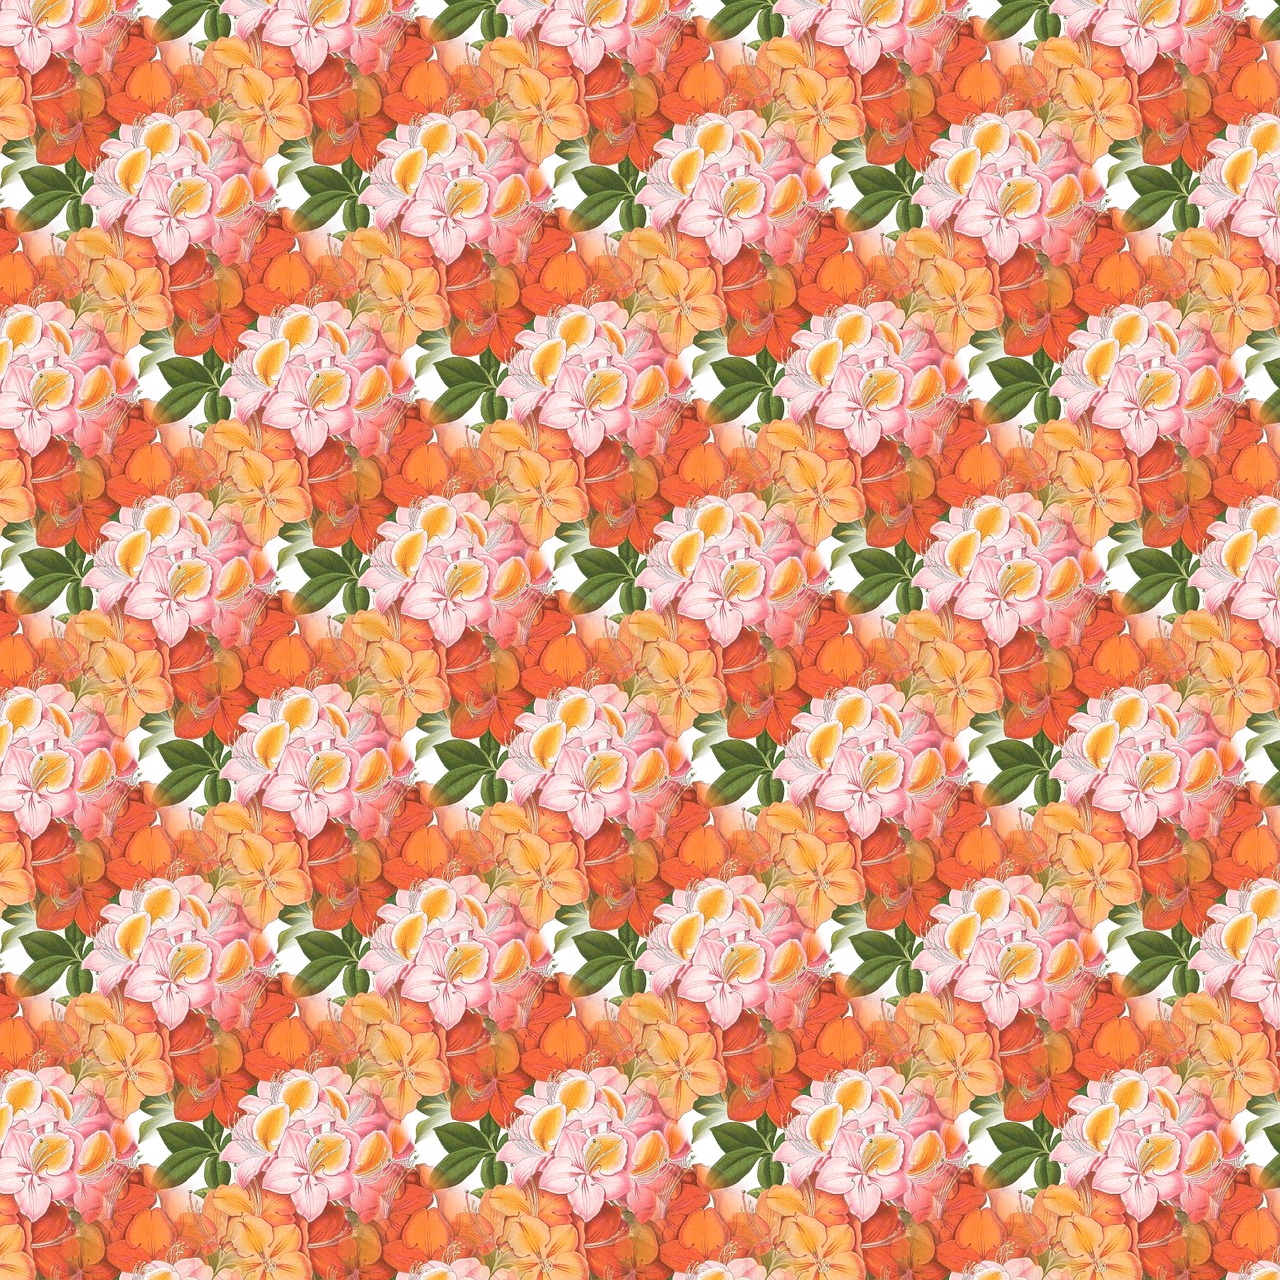 scrapbook background floral free photo